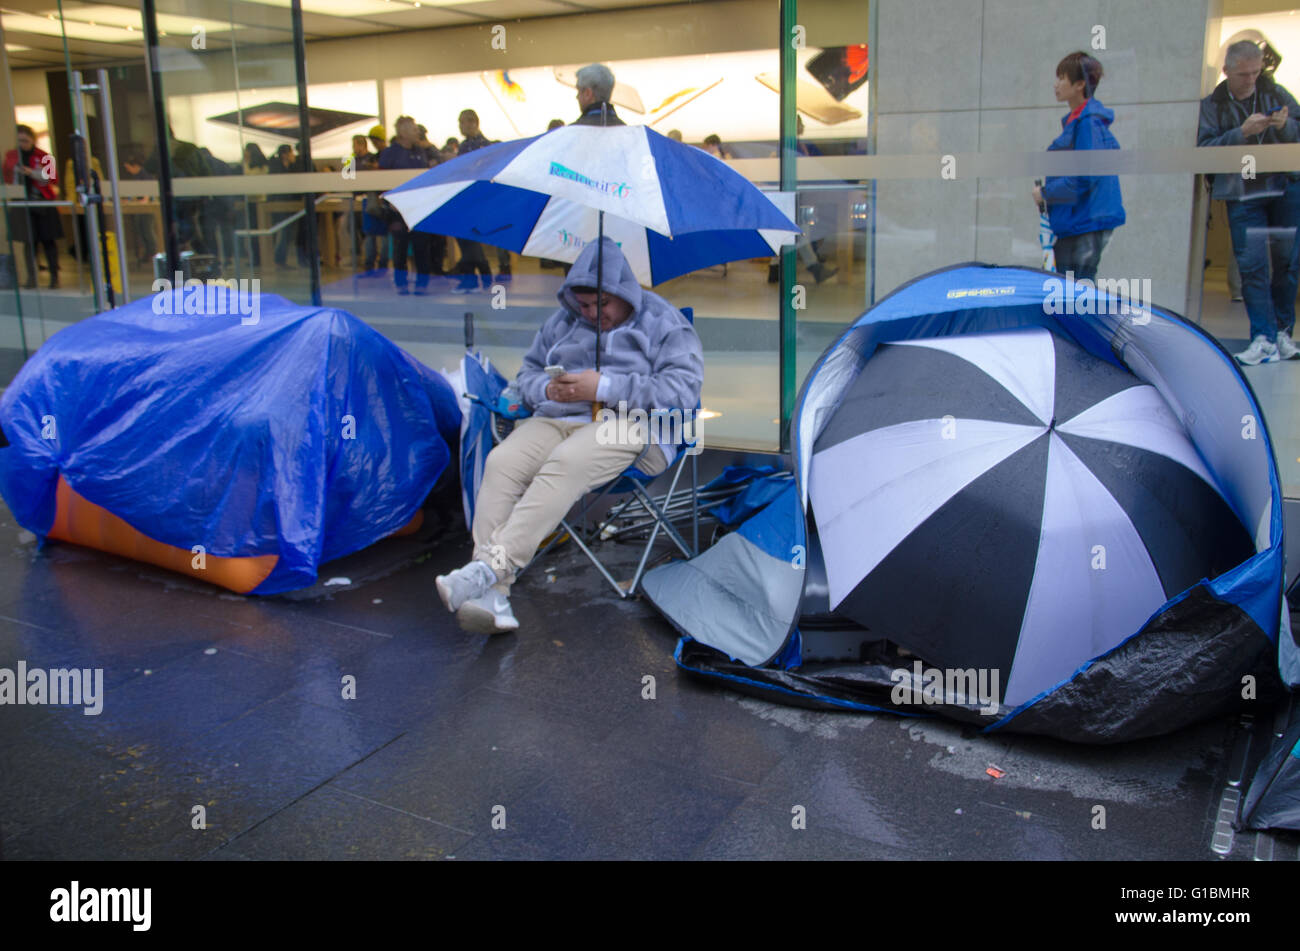 Sydney, Australia - 24th September 2015: Fans line the outside of Sydney's Central Business District Apple store with tents waiting for the new phone launch. The iPhone 6S officially launches on the 25th of September 2015. Stock Photo